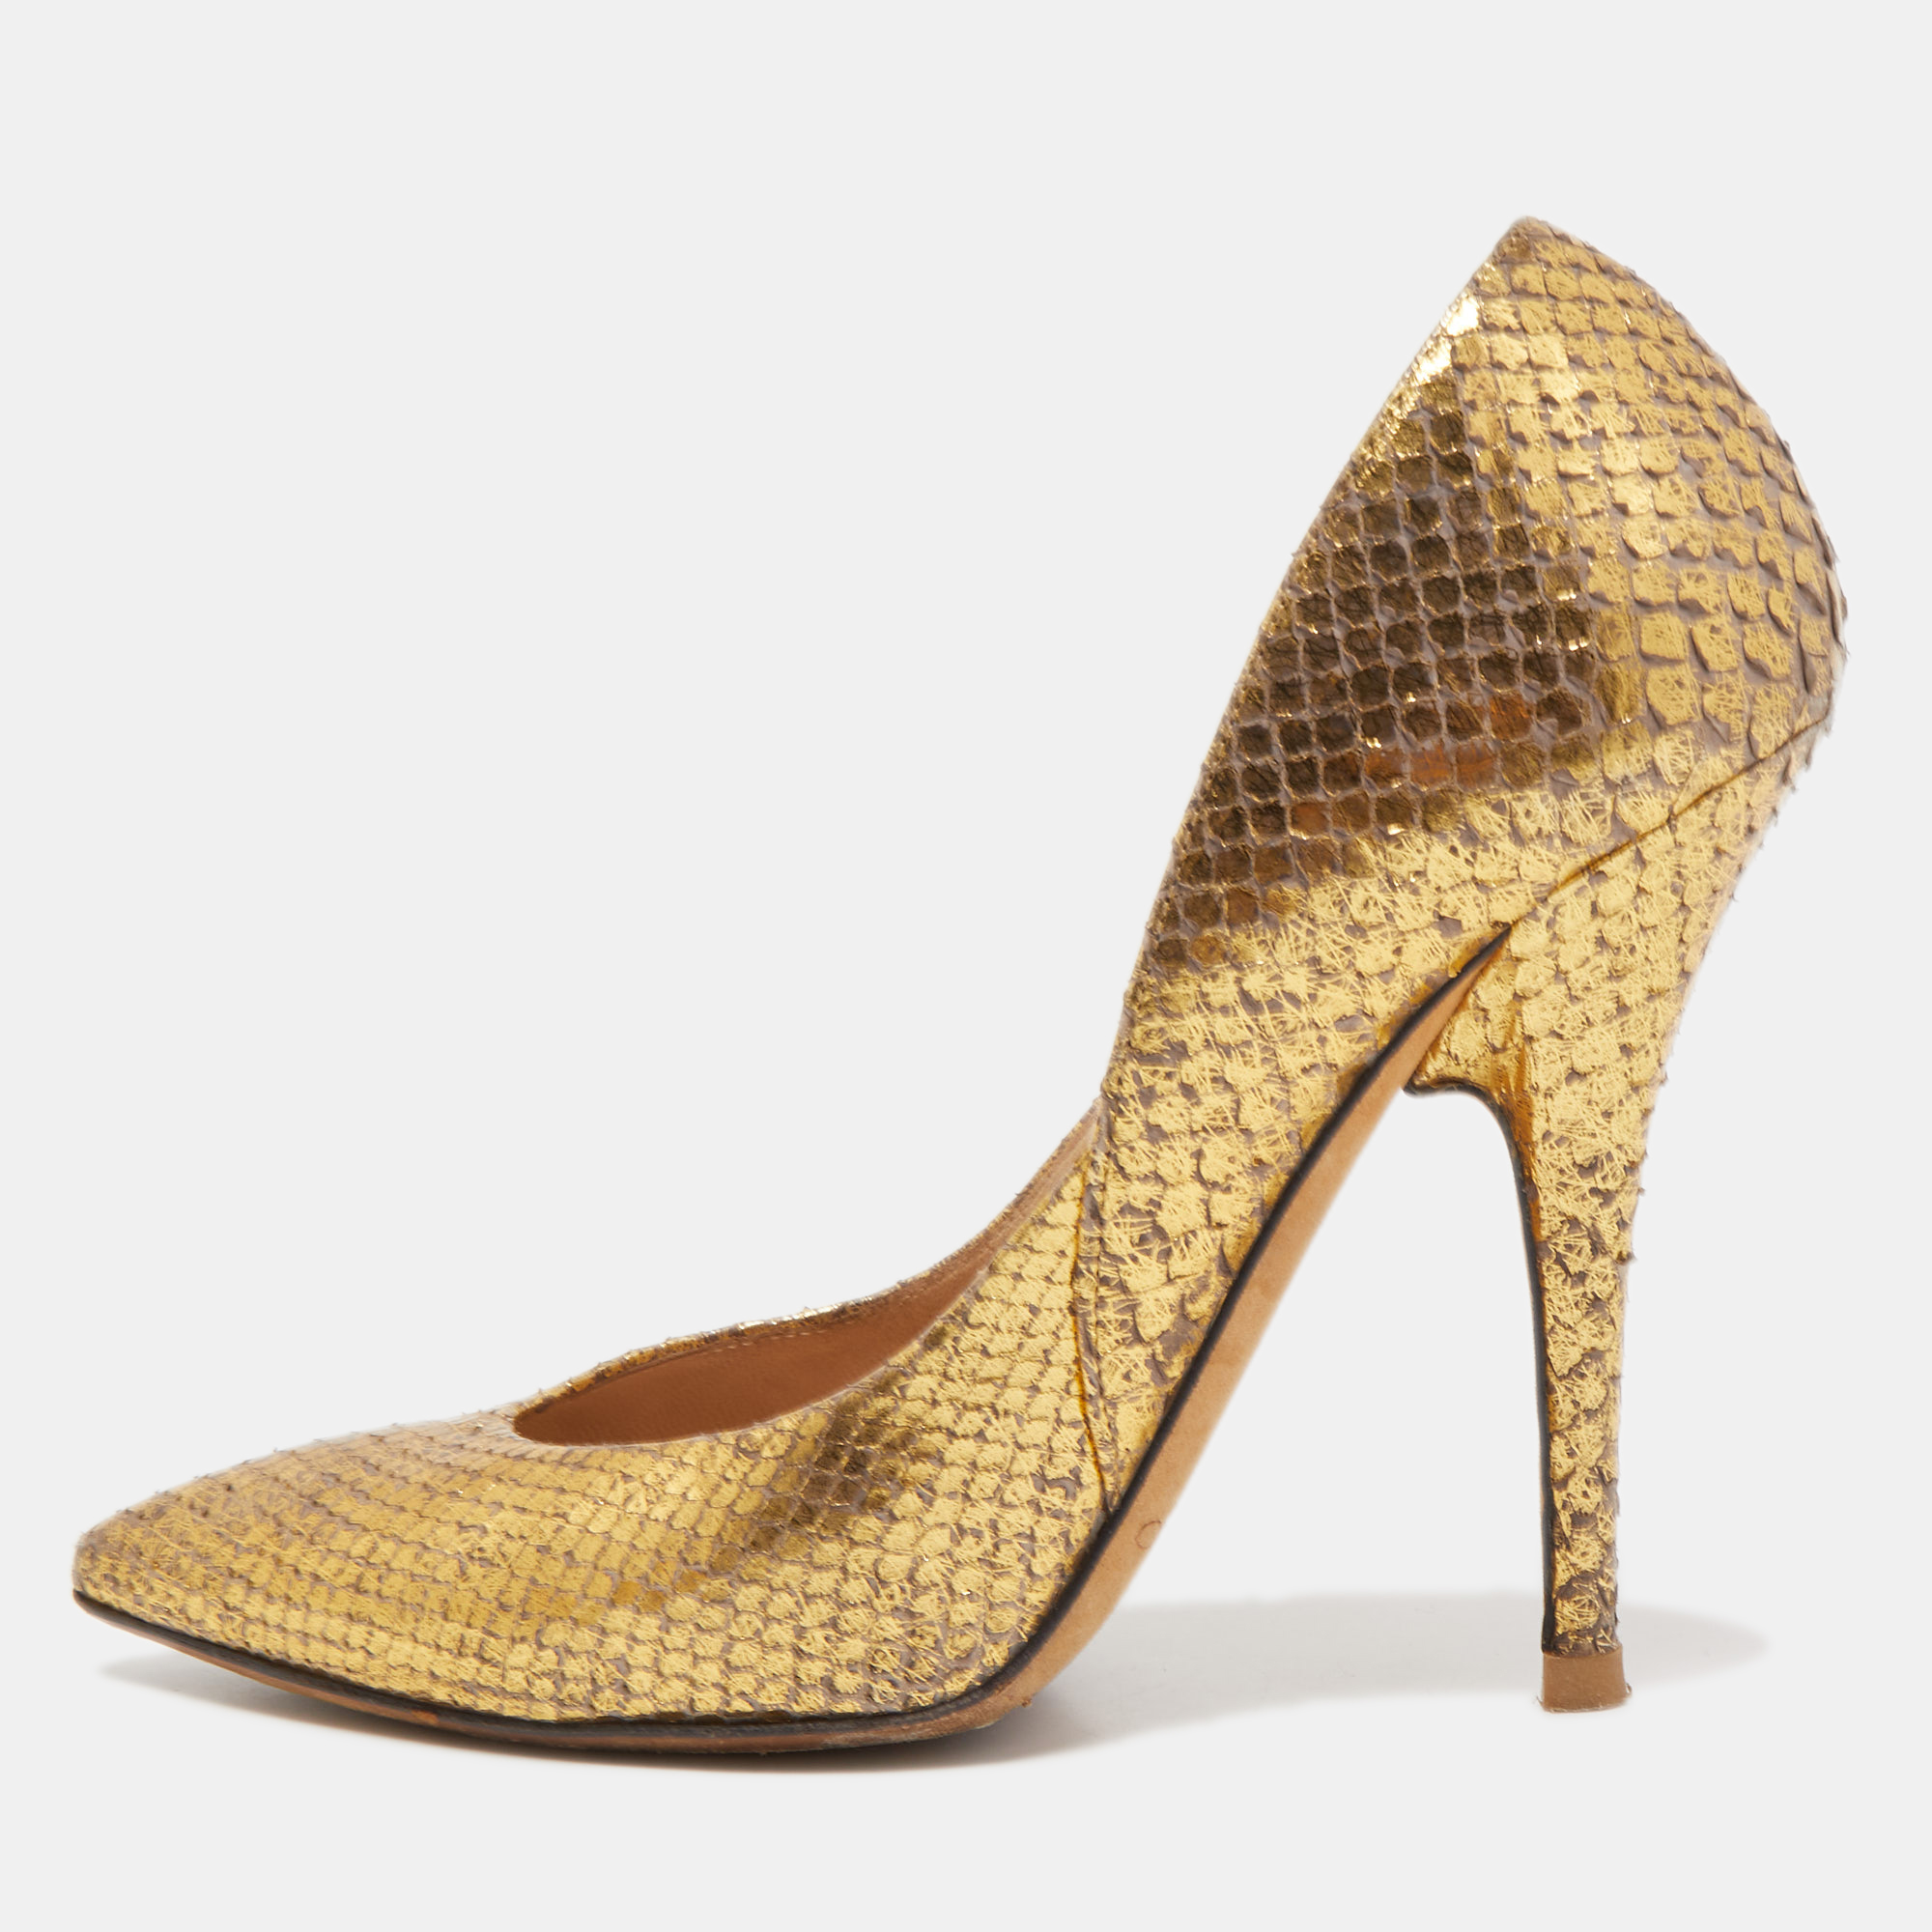 Pre-owned Jimmy Choo Gold Python Pumps Size 36.5